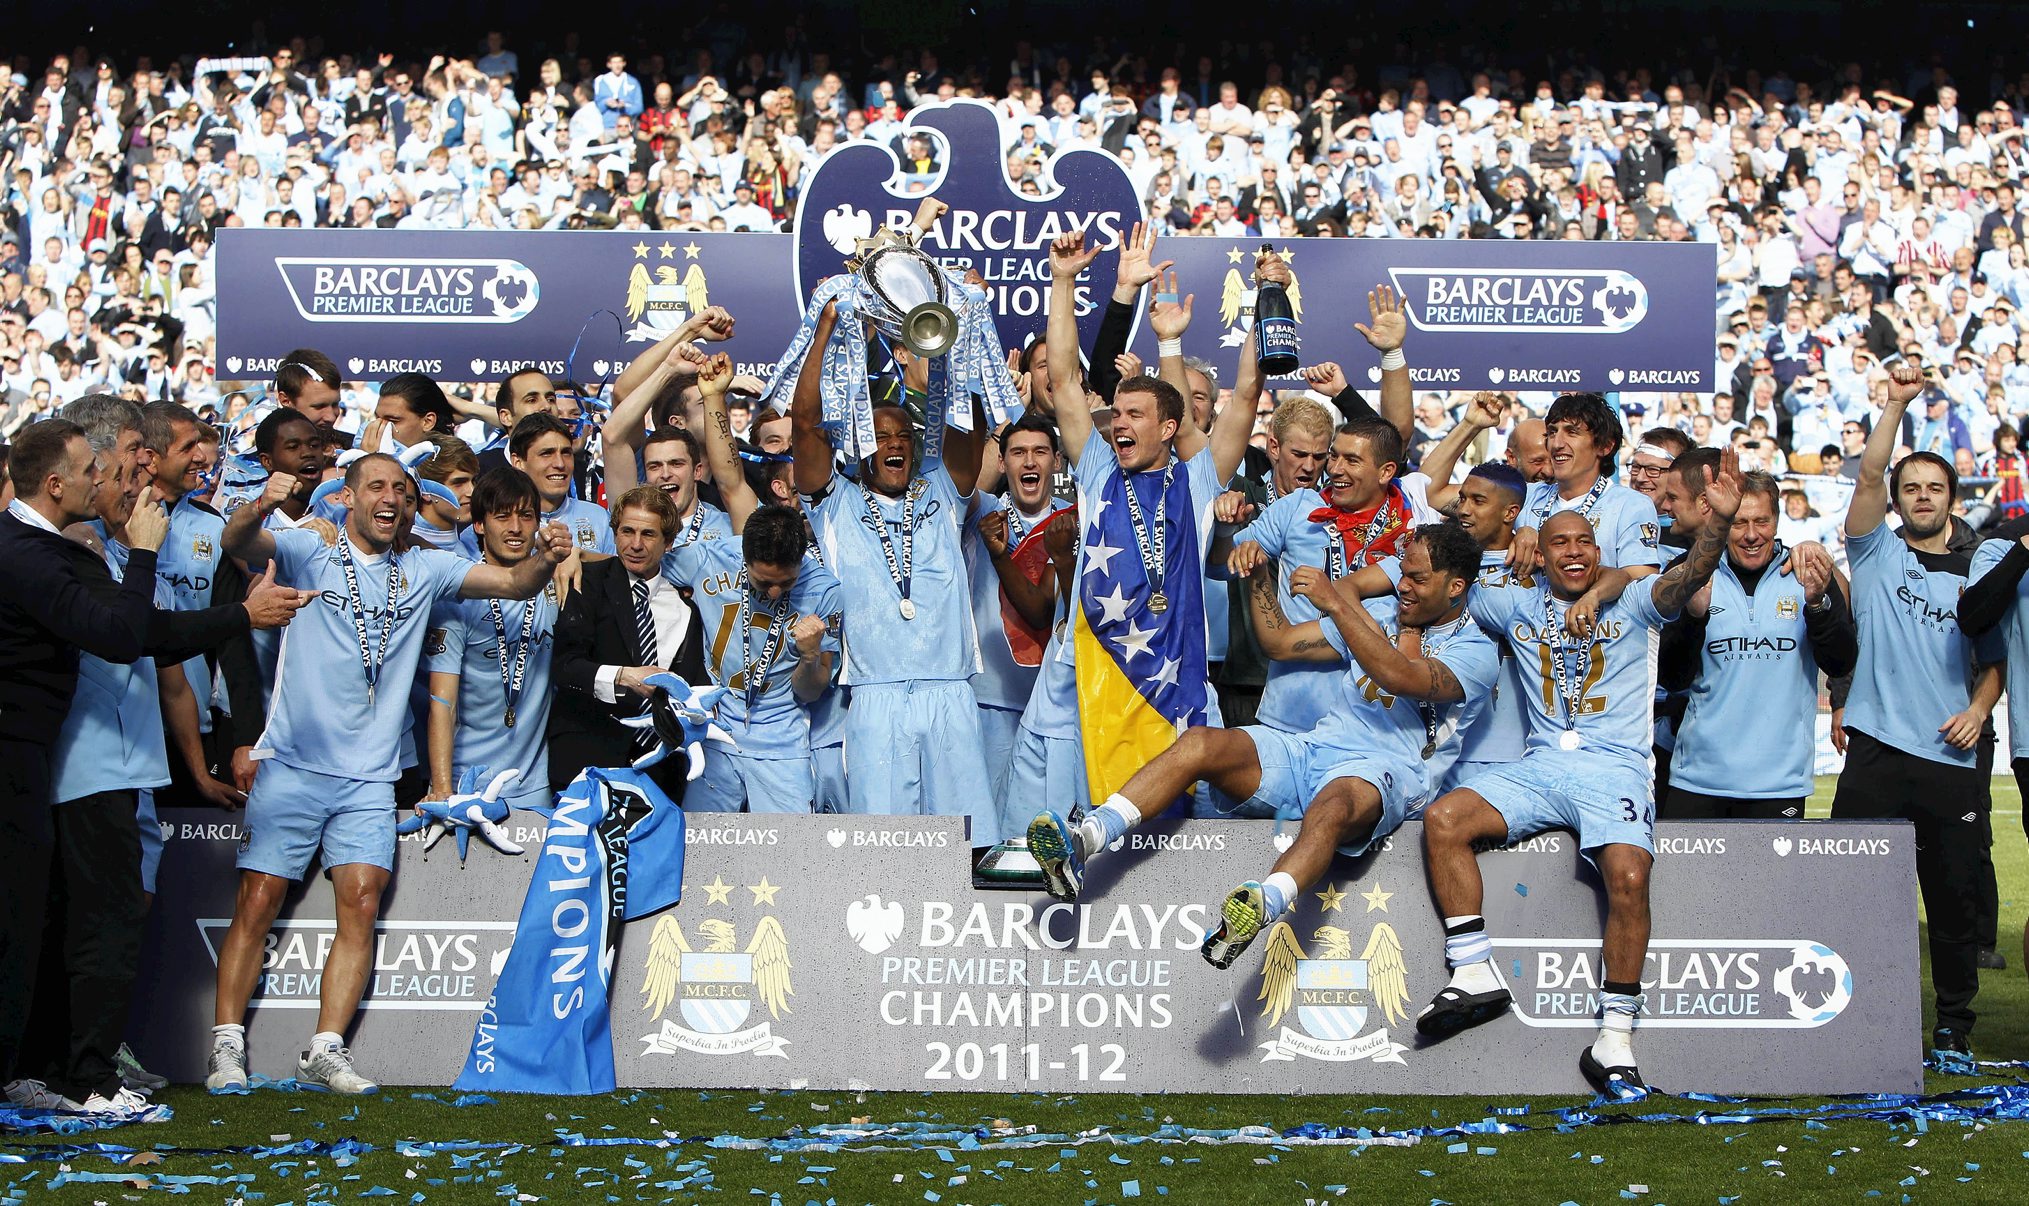 Manchester City players celebrate with the trophy after winning the Premier League during the Barclays Premier League match at the Etihad Stadium, Manchester. PRESS ASSOCIATION Photo. Picture date: Sunday May 13, 2012. See PA story SOCCER Man City. Photo credit should read: Peter Byrne/PA Wire. RESTRICTIONS: Editorial use only. Maximum 45 images during a match. No video emulation or promotion as 'live'. No use in games, competitions, merchandise, betting or single club/player services. No use with unofficial audio, video, data, fixtures or club/league logos.